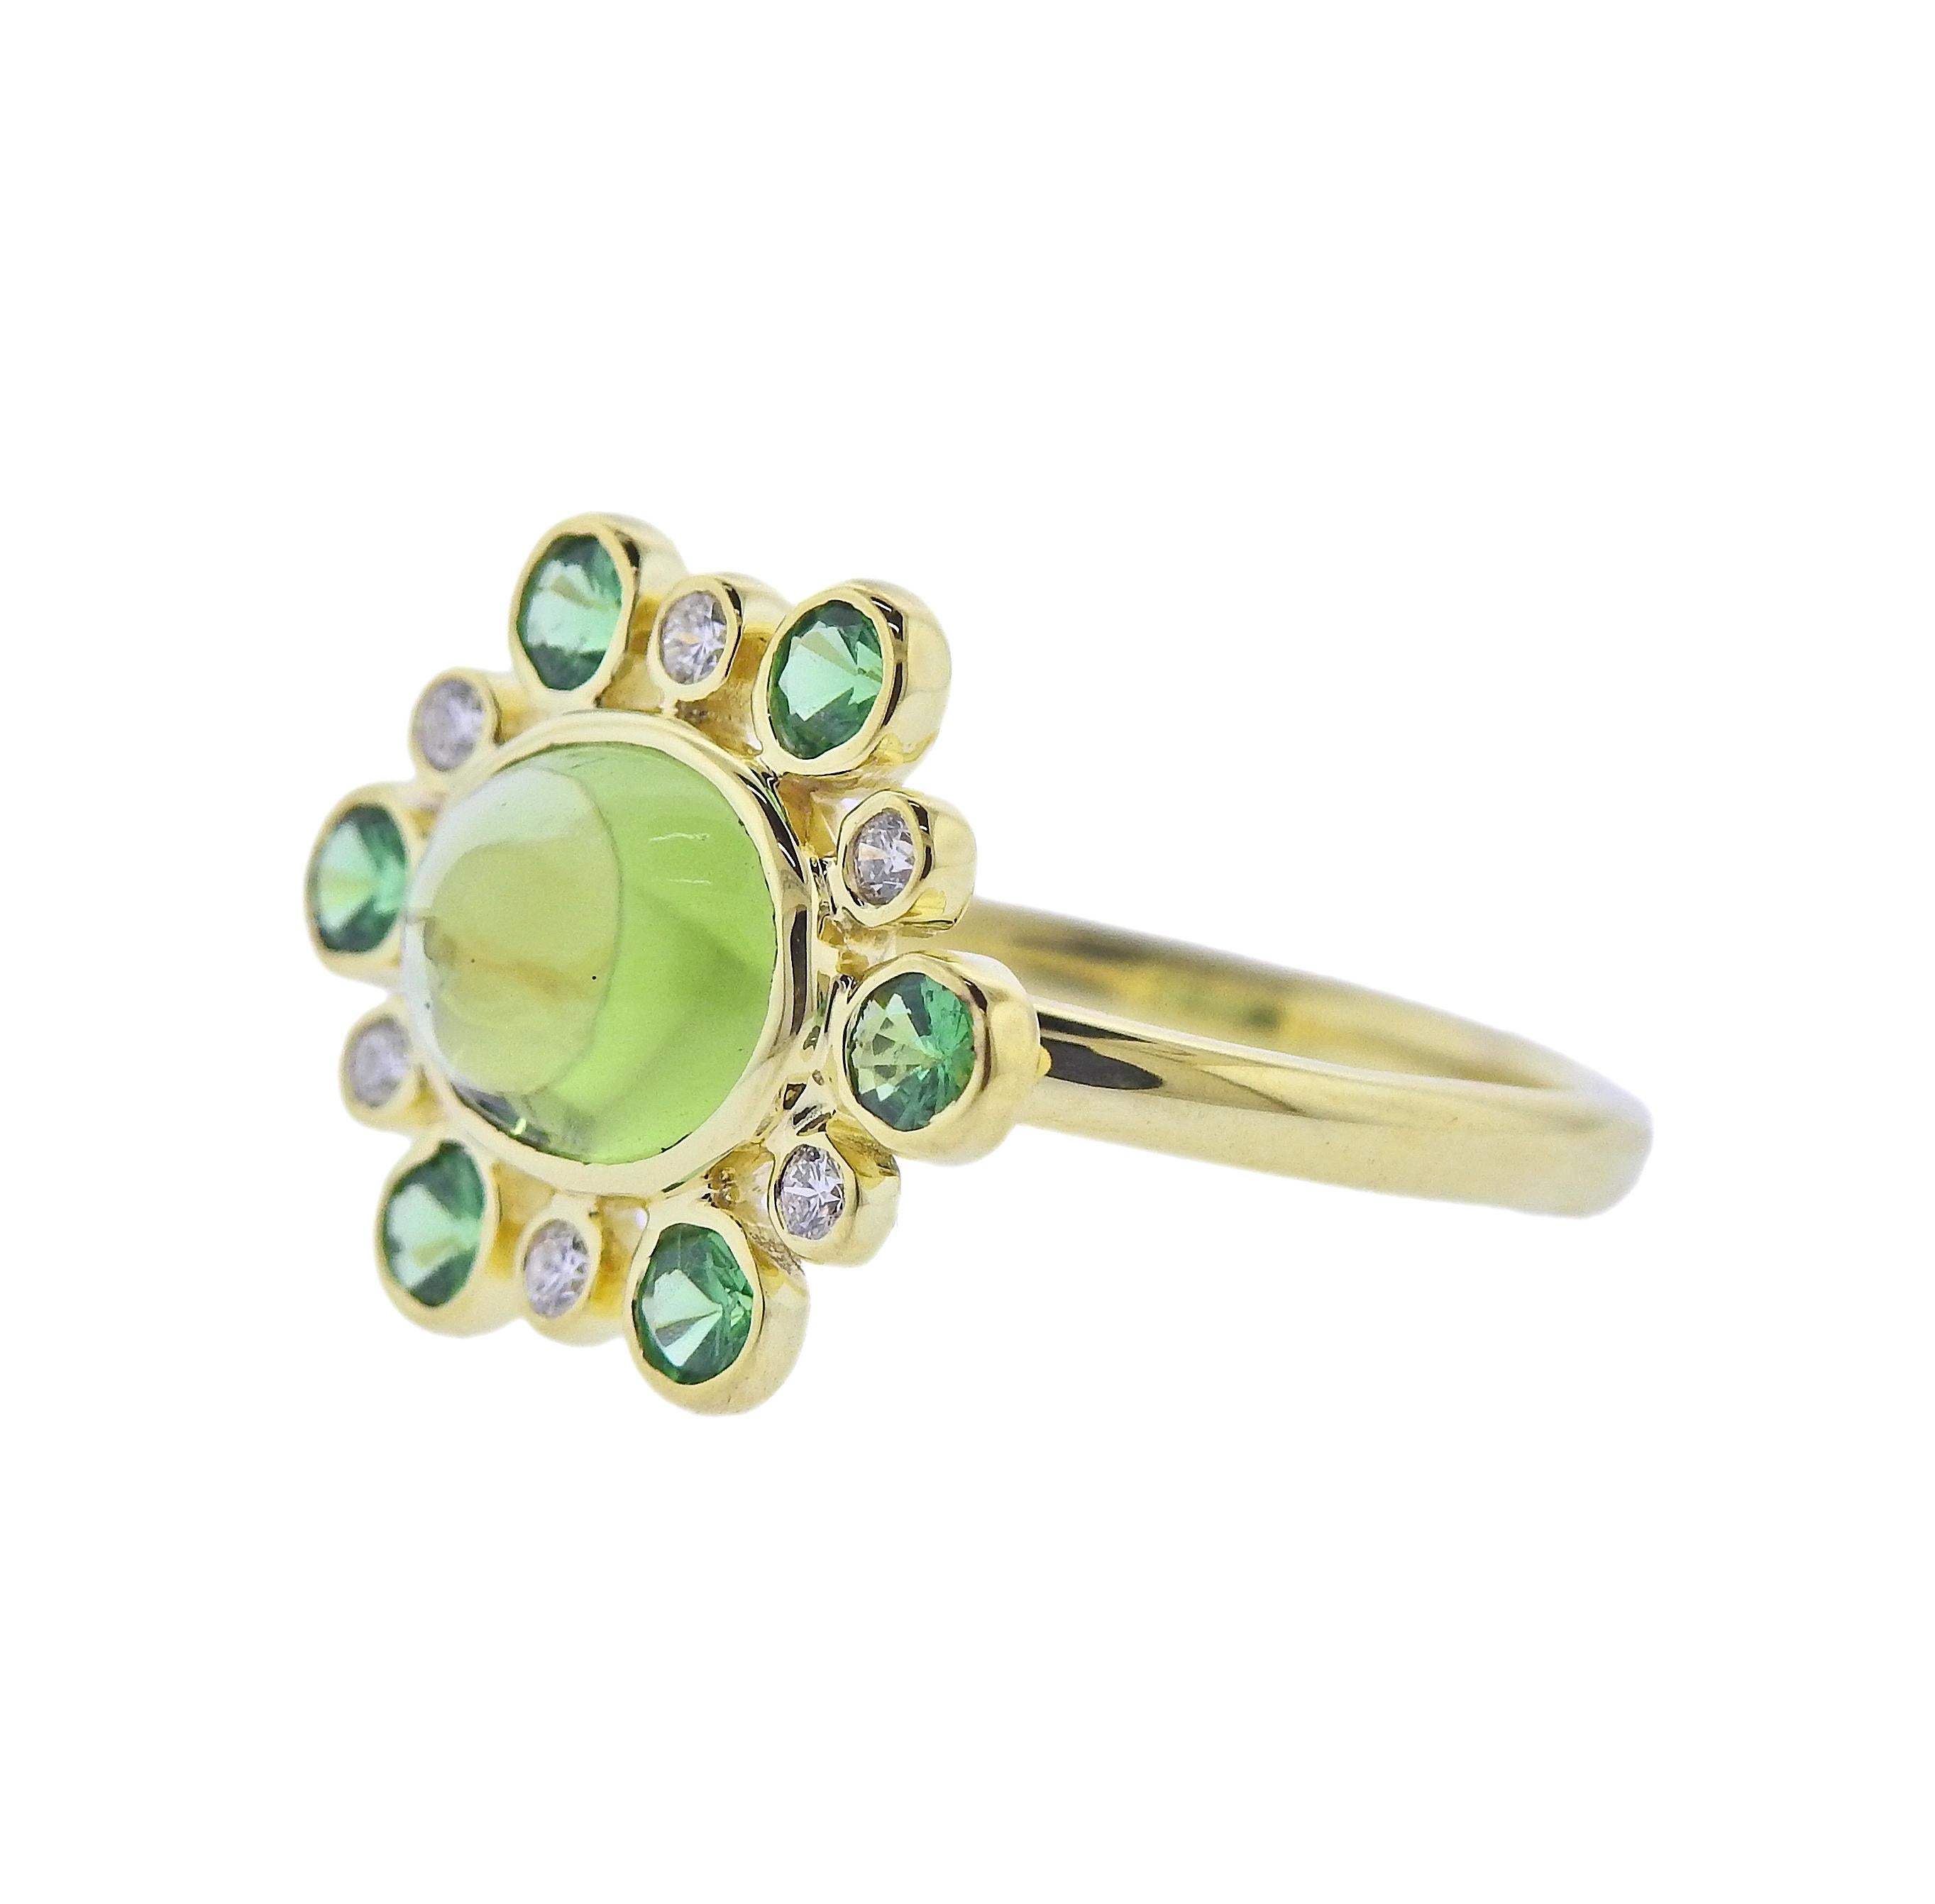 Brand new 14k gold Maz ring, with 0.12ctw H/VS diamonds, tsavorites and peridot.  Ring size 6.75, top is 14.5 x 19mm, weight 3.5 grams. Marked: MAZ, 14k.